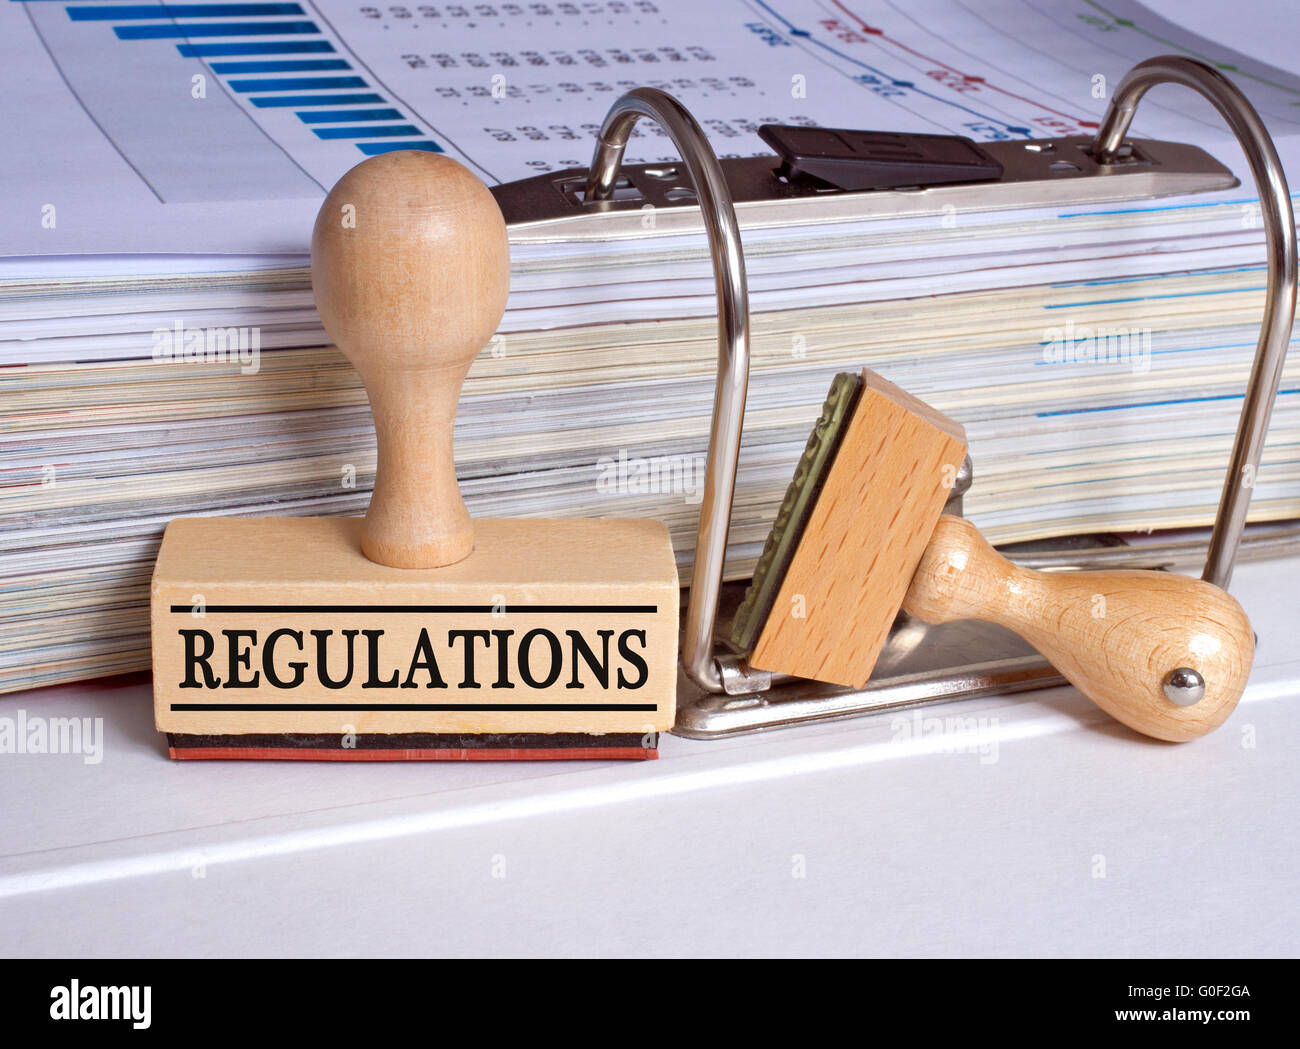 Regulations - rubber stamp in the office Stock Photo